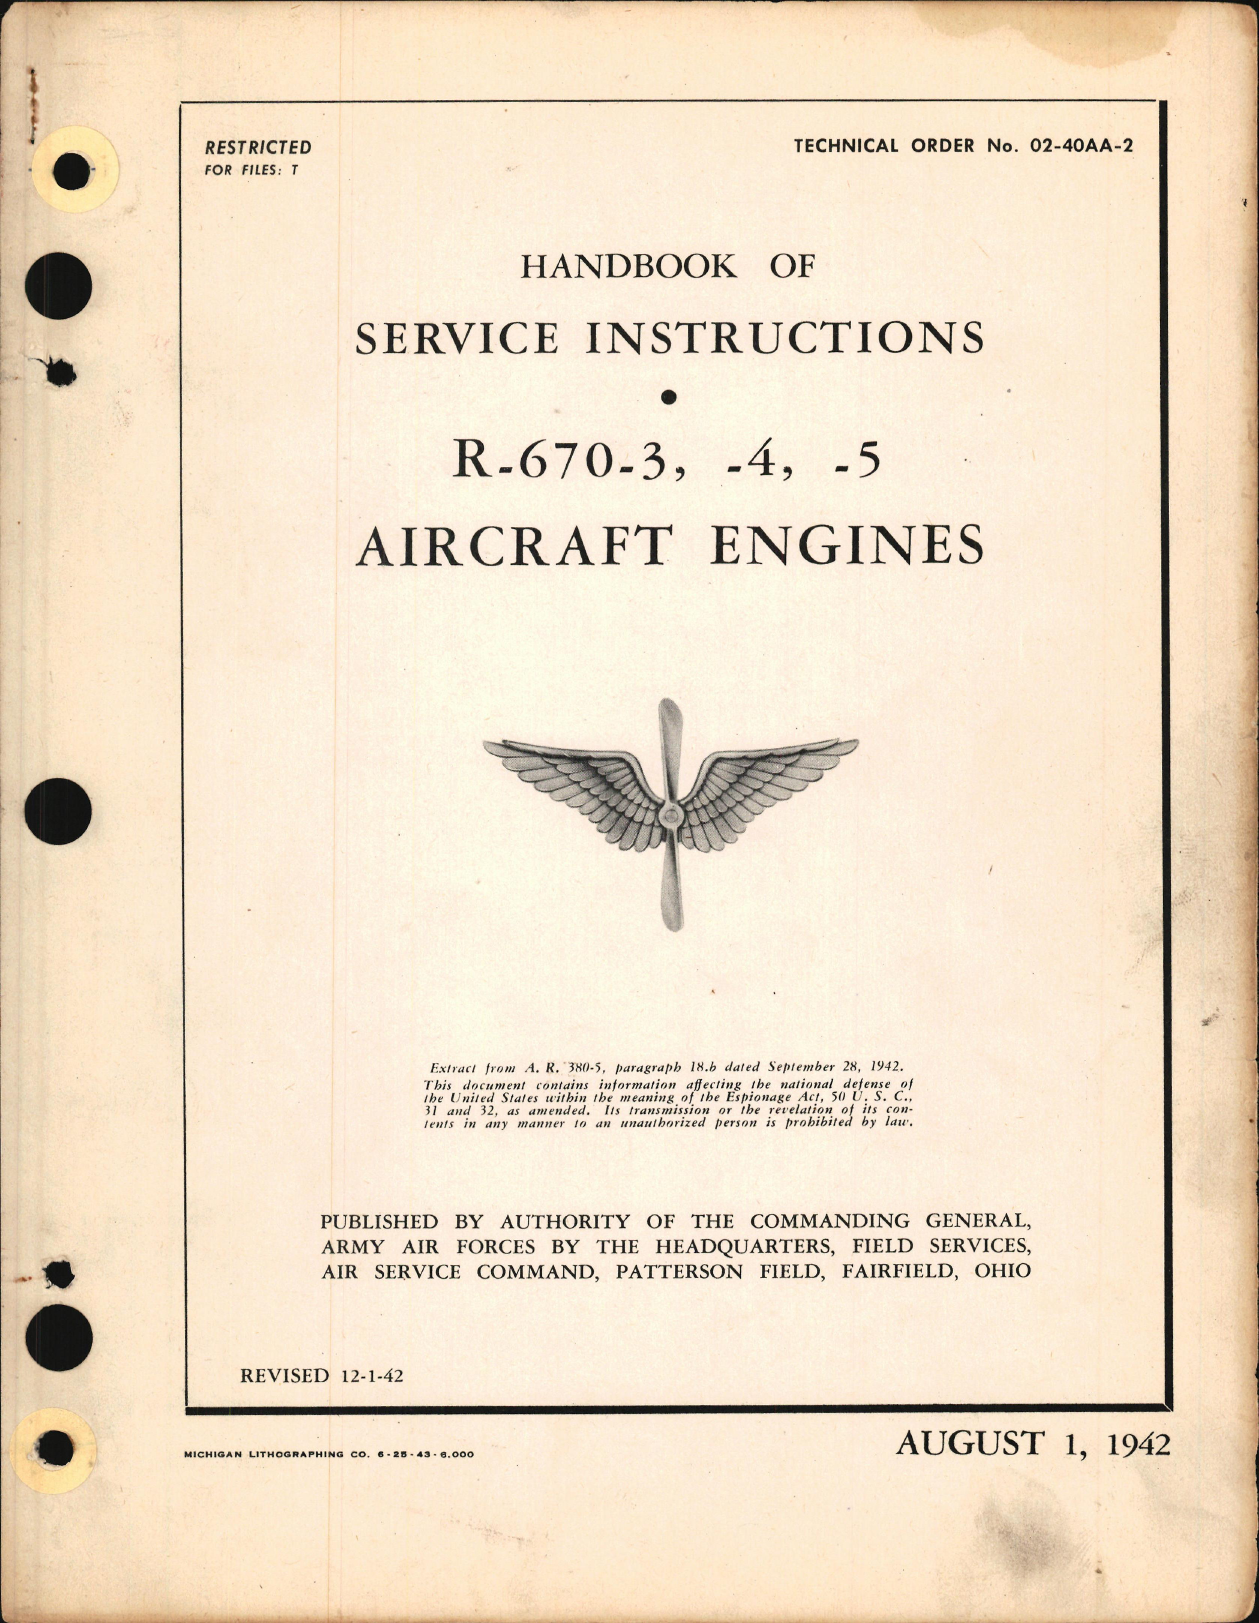 Sample page 1 from AirCorps Library document: Service Instructions for R-670-3, R-670-4, and R-670-5 Engines